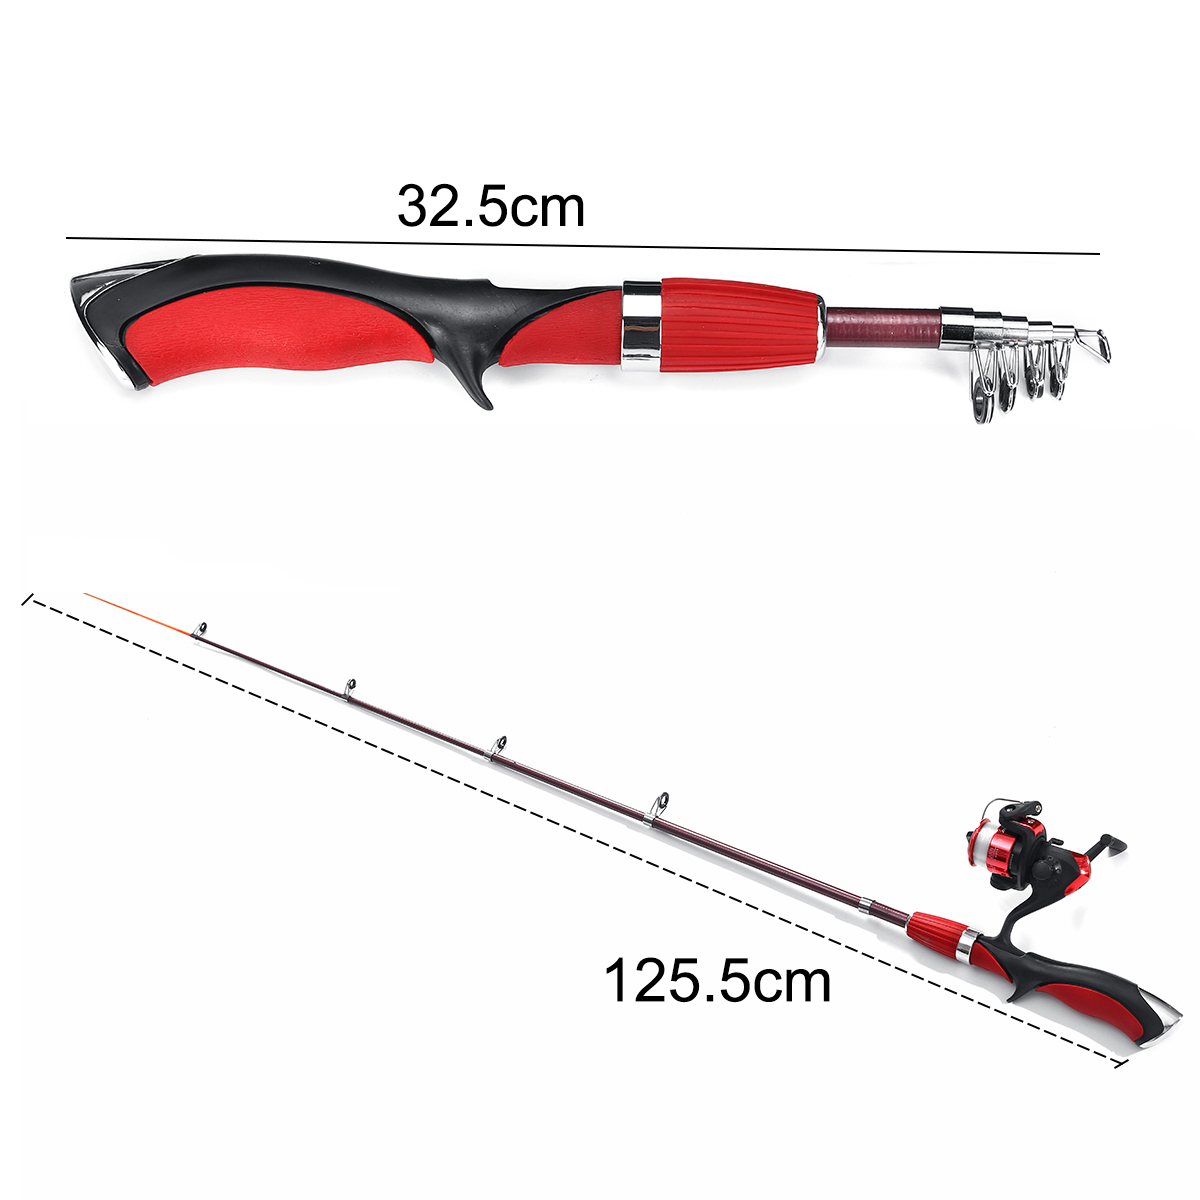 Carbon-Fiber-Telescopic-Fishing-Rod-amp-Spinning-Reel-Combo-Kit-with-Fishing-Line-1589038